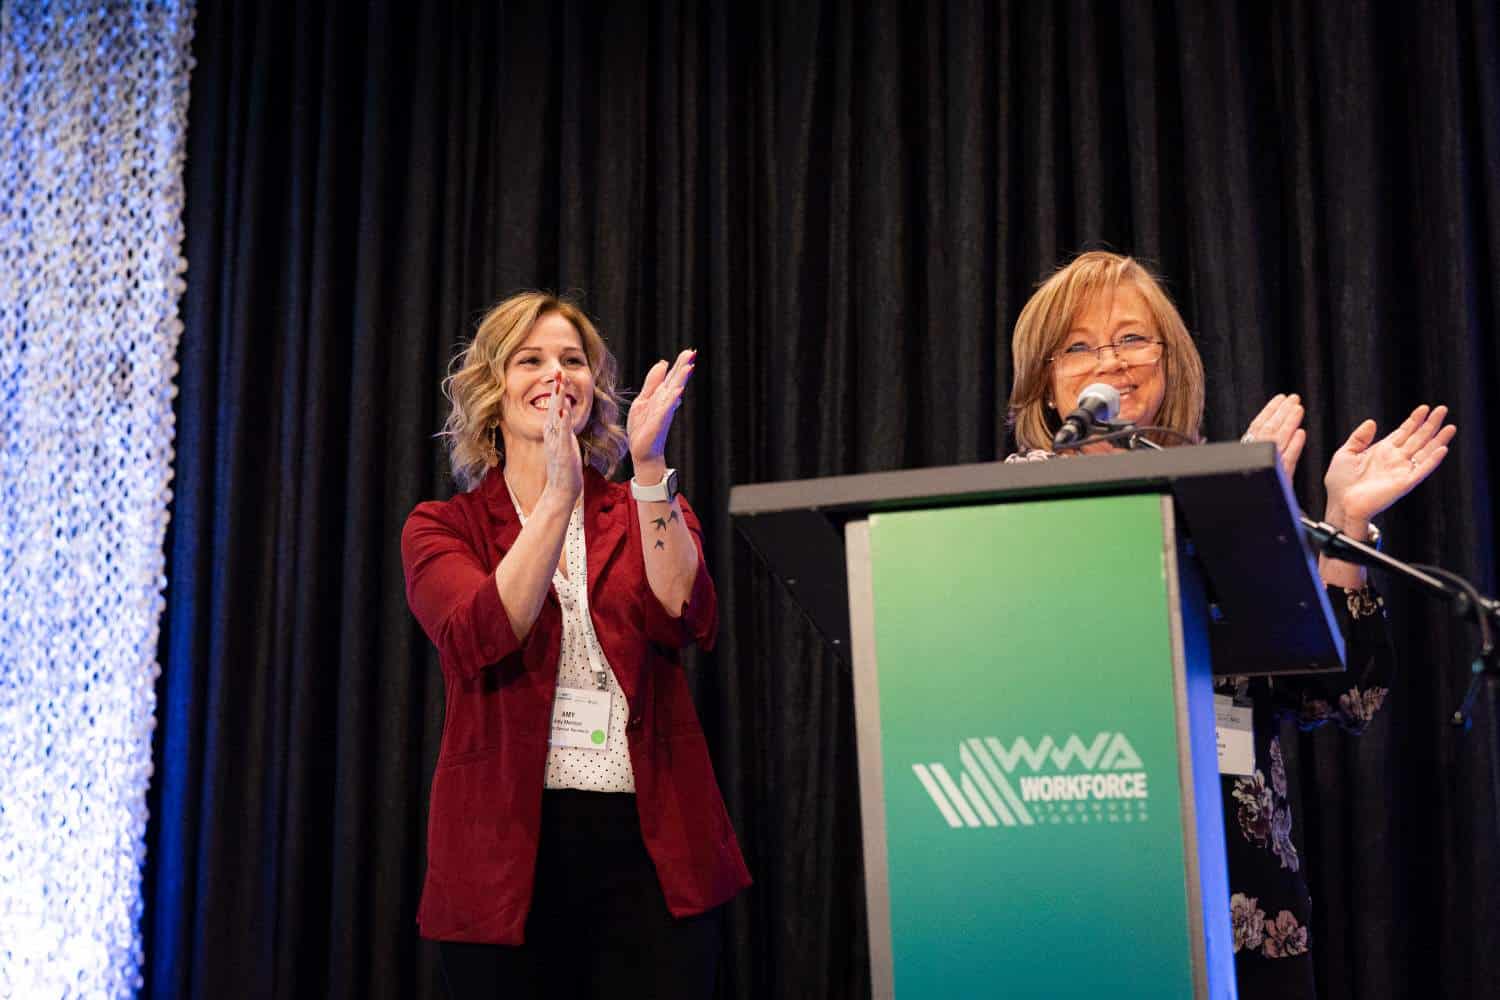 Growing “Stronger Together” At The 2023 WWA Conference